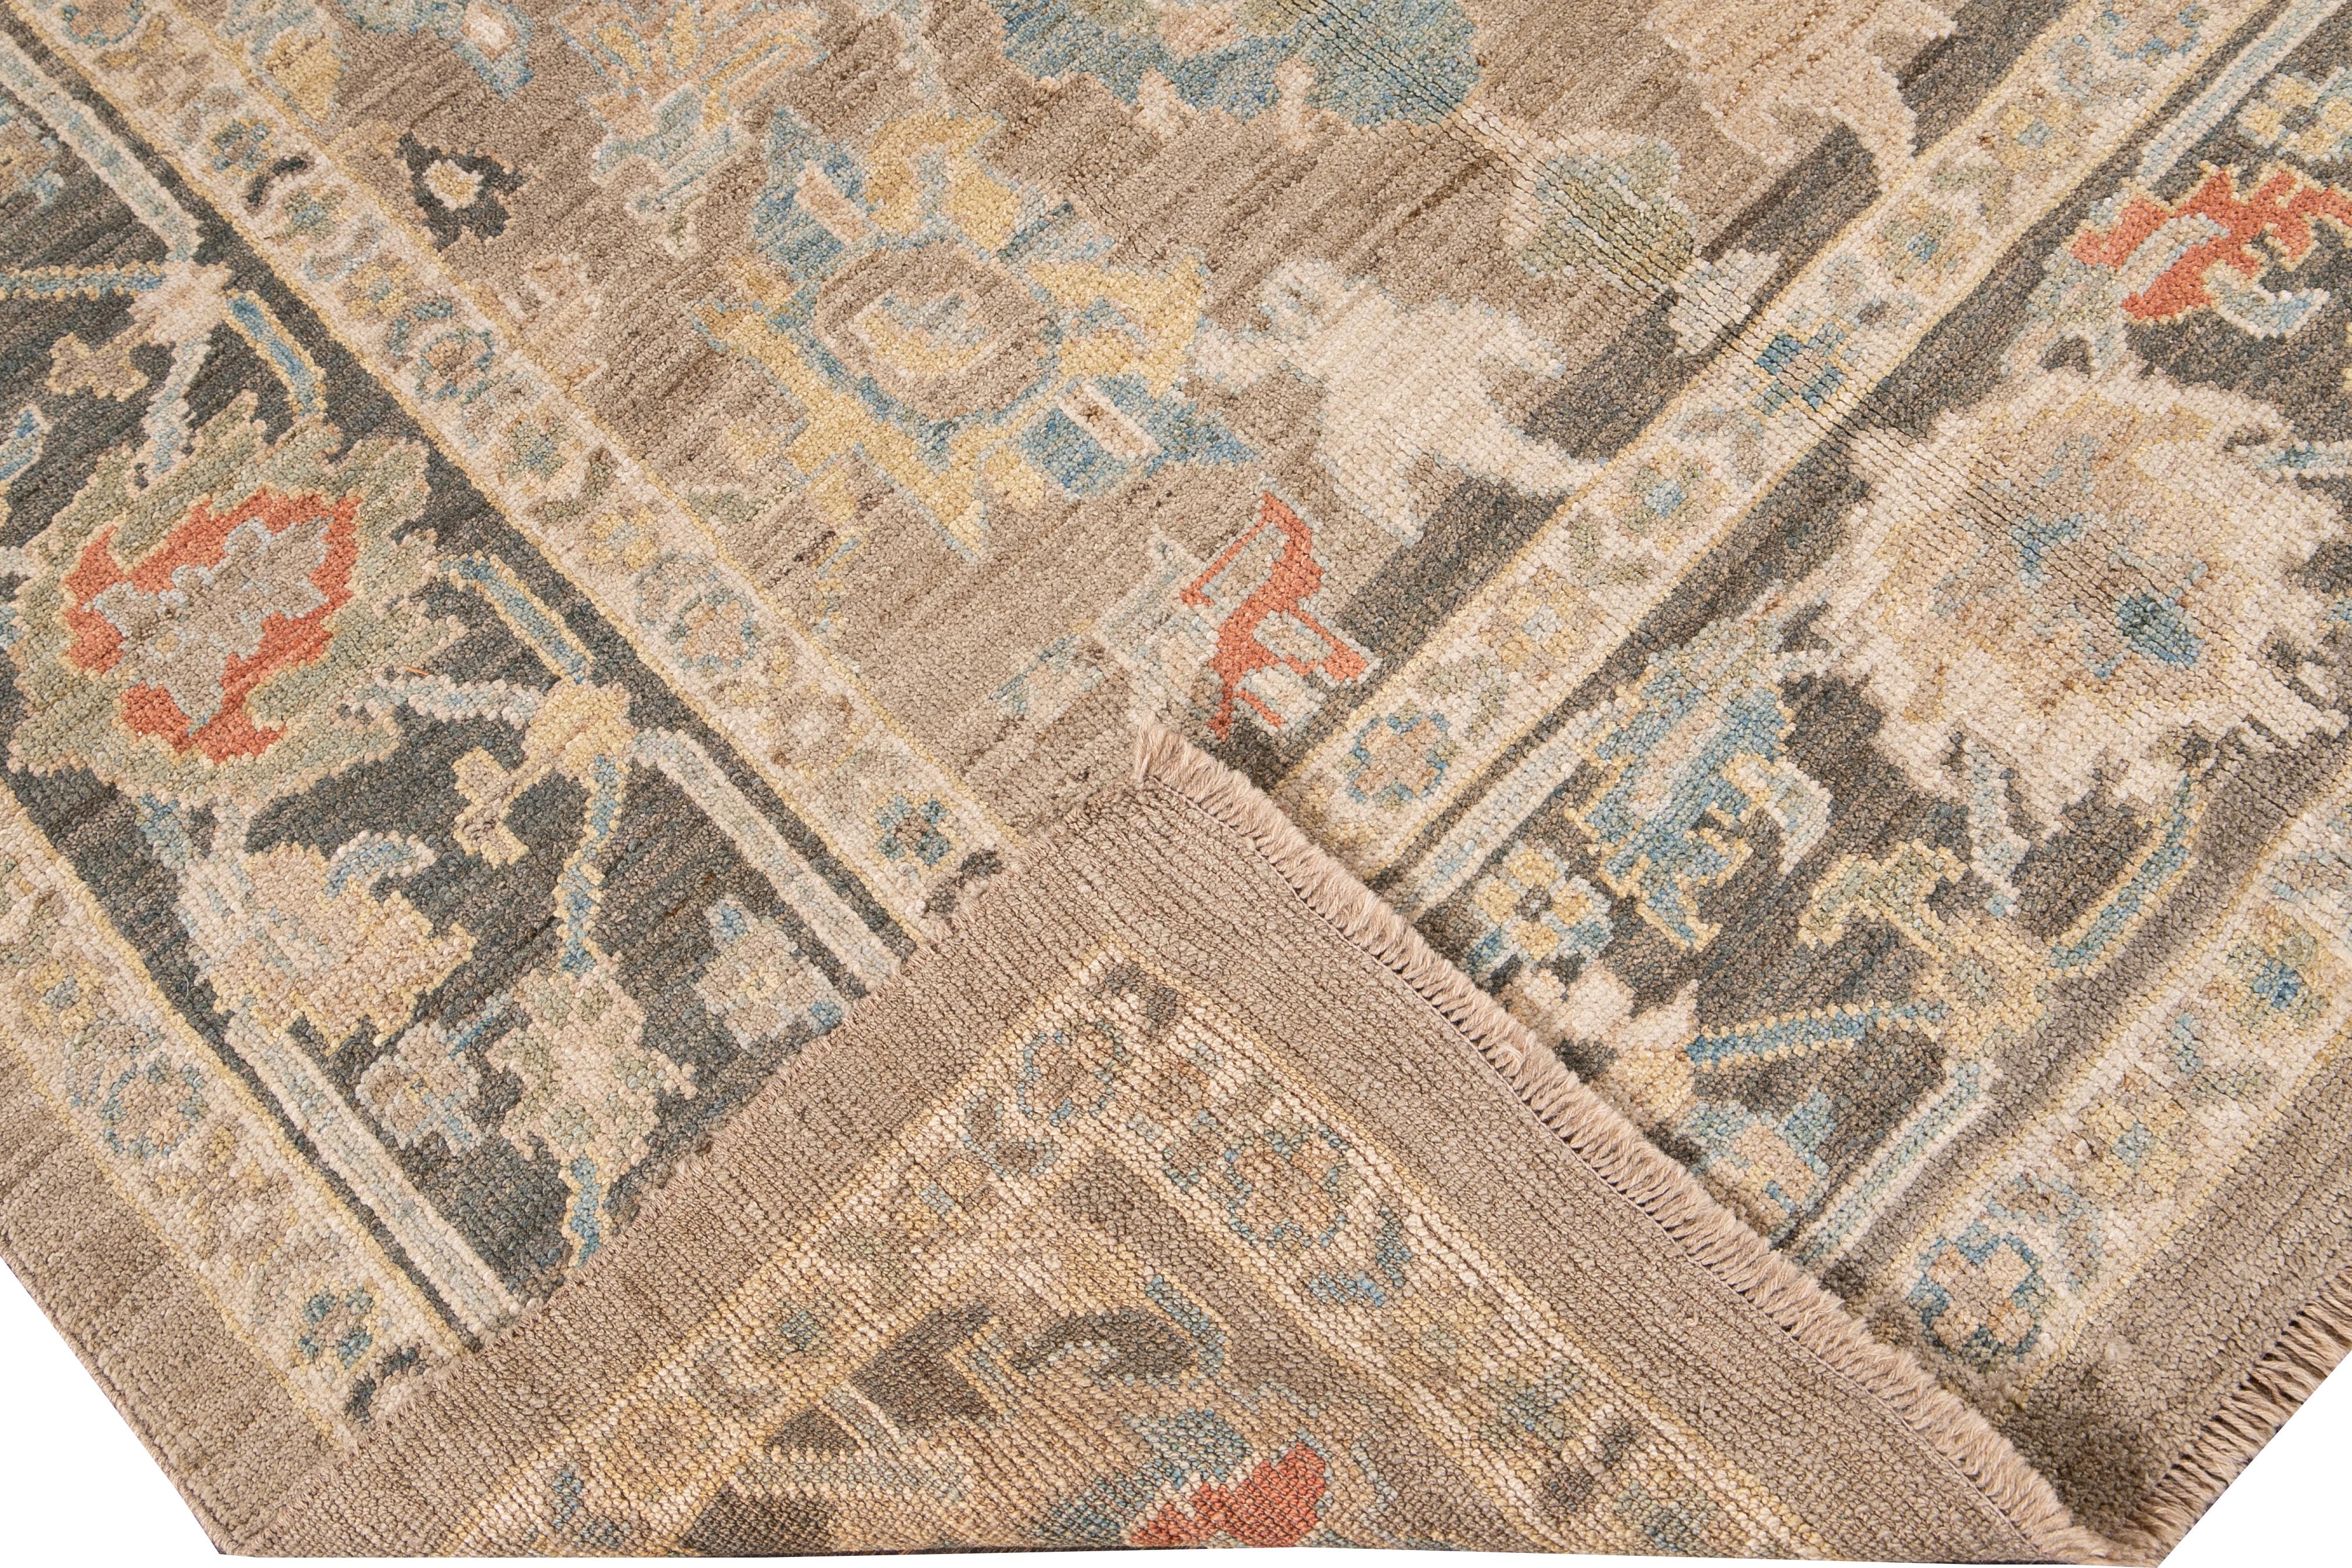 Beautiful modern Sultanabad hand-knotted wool rug with a beige field. This Sultanabad rug has a gray frame and ivory, yellow, blue, and orange accents in a gorgeous all-over Classic geometric floral design.

This rug measures: 5'10